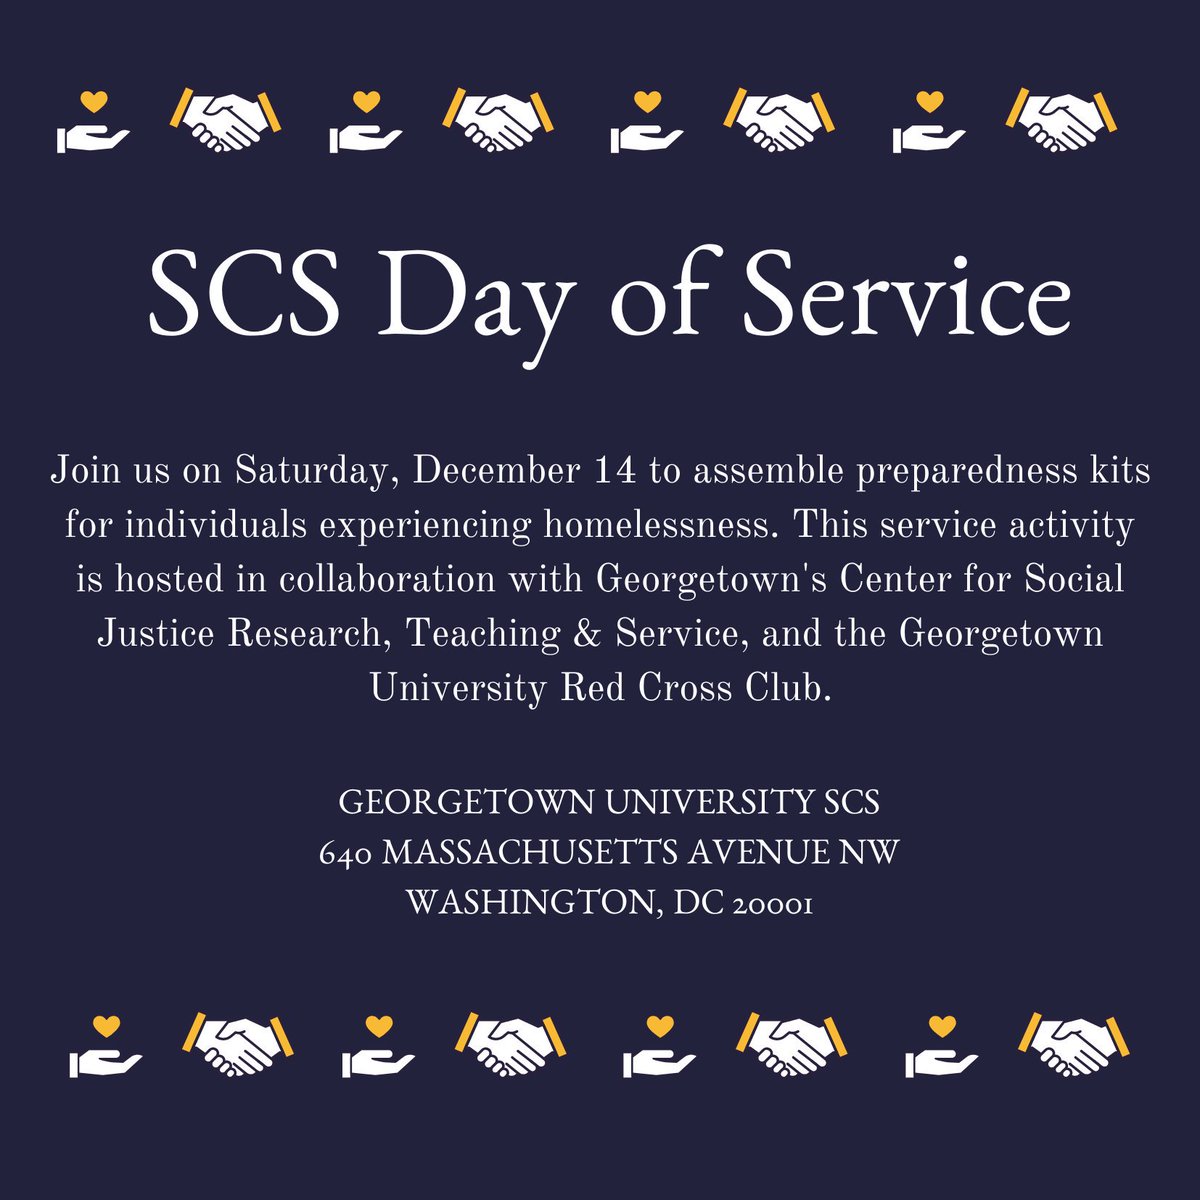 In the spirit of Hoyas for others, join us to make a difference: Sat. Dec, 14 from 9a–12p RSVP: bit.ly/2qqigtQ A light breakfast will be provided, along with a brief presentation on outreach to individuals experiencing homelessness. #hoyasgiveback #community